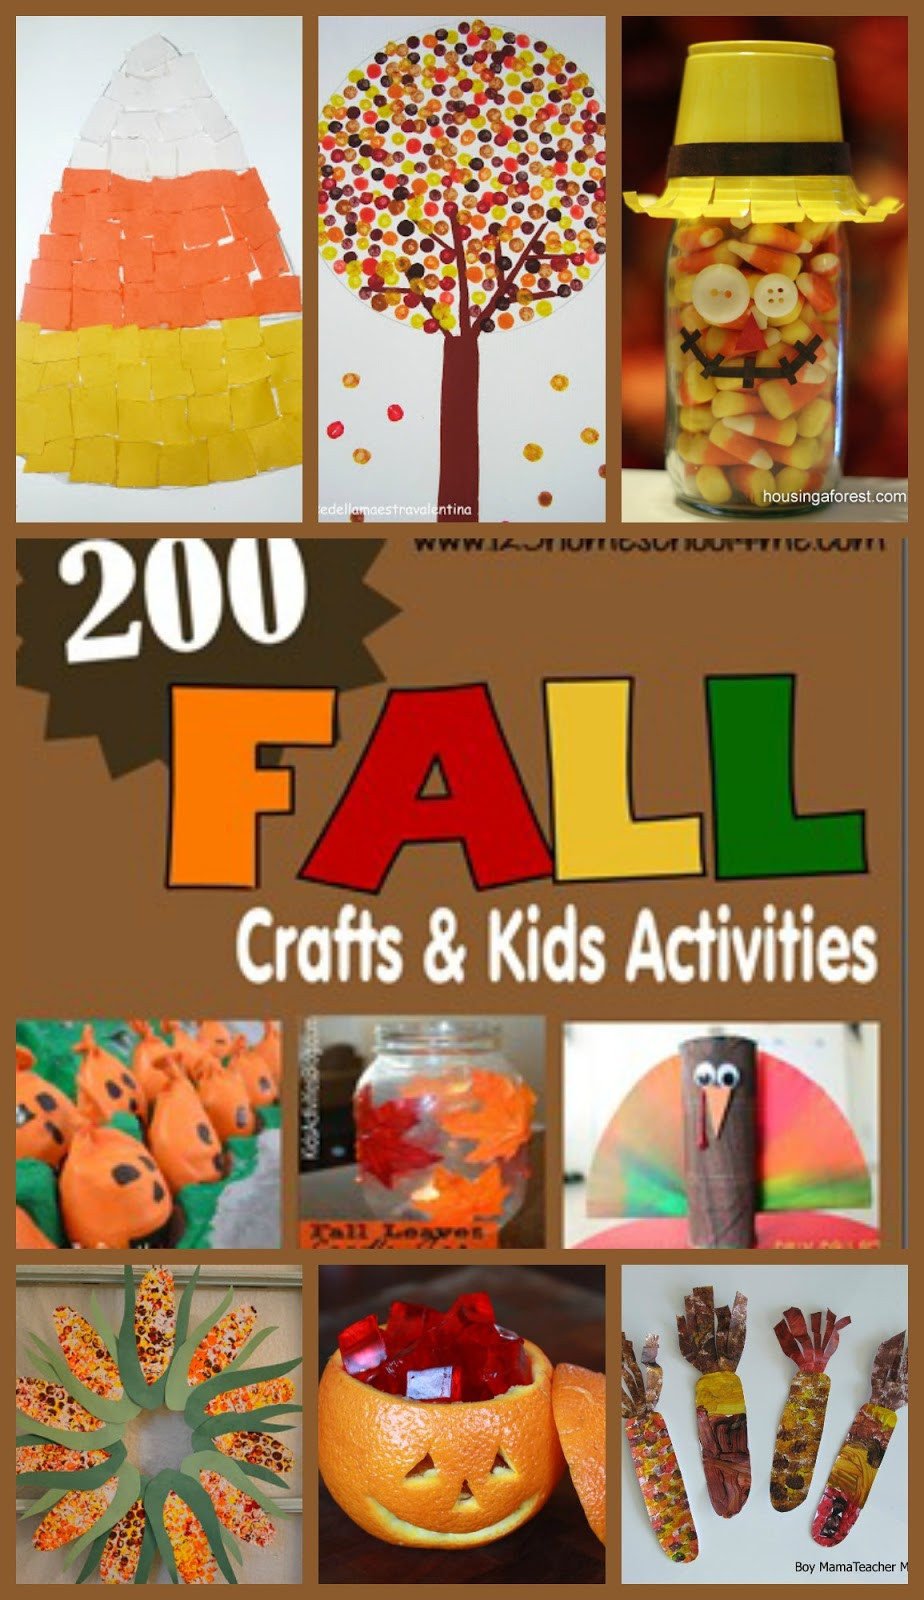 Fun Fall Craft For Kids
 200 Fall Crafts Kids Activities Printables and Snack Ideas